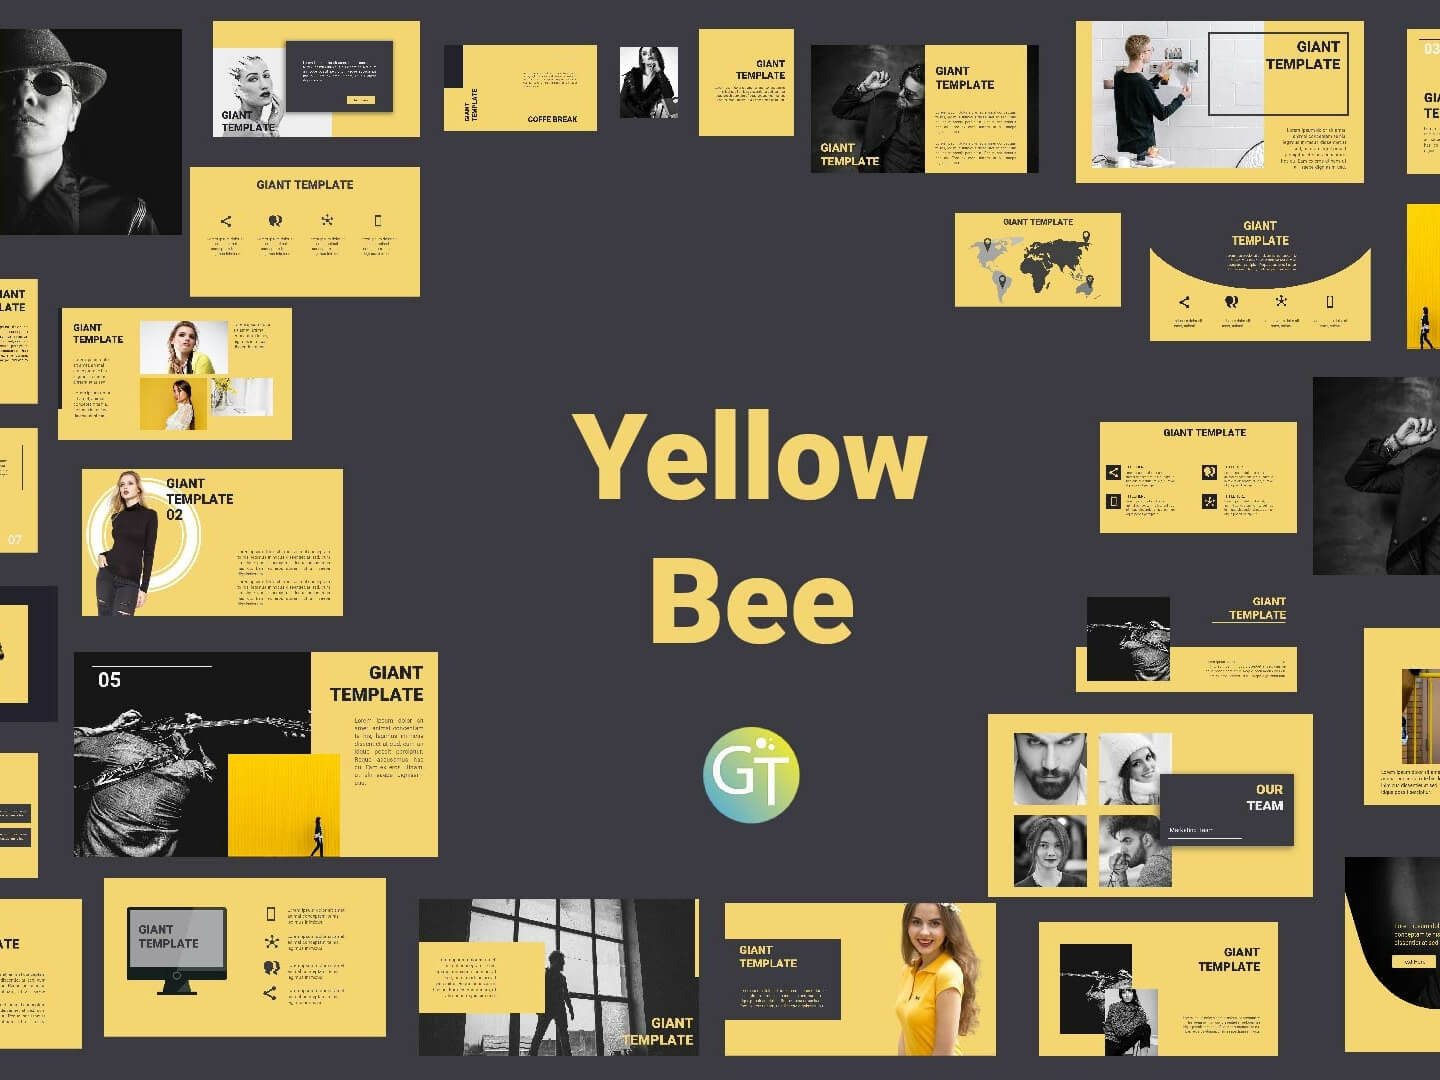 Yellowbee Free Powerpoint Template Free Downloadgiant In Powerpoint Animation Templates Free Download